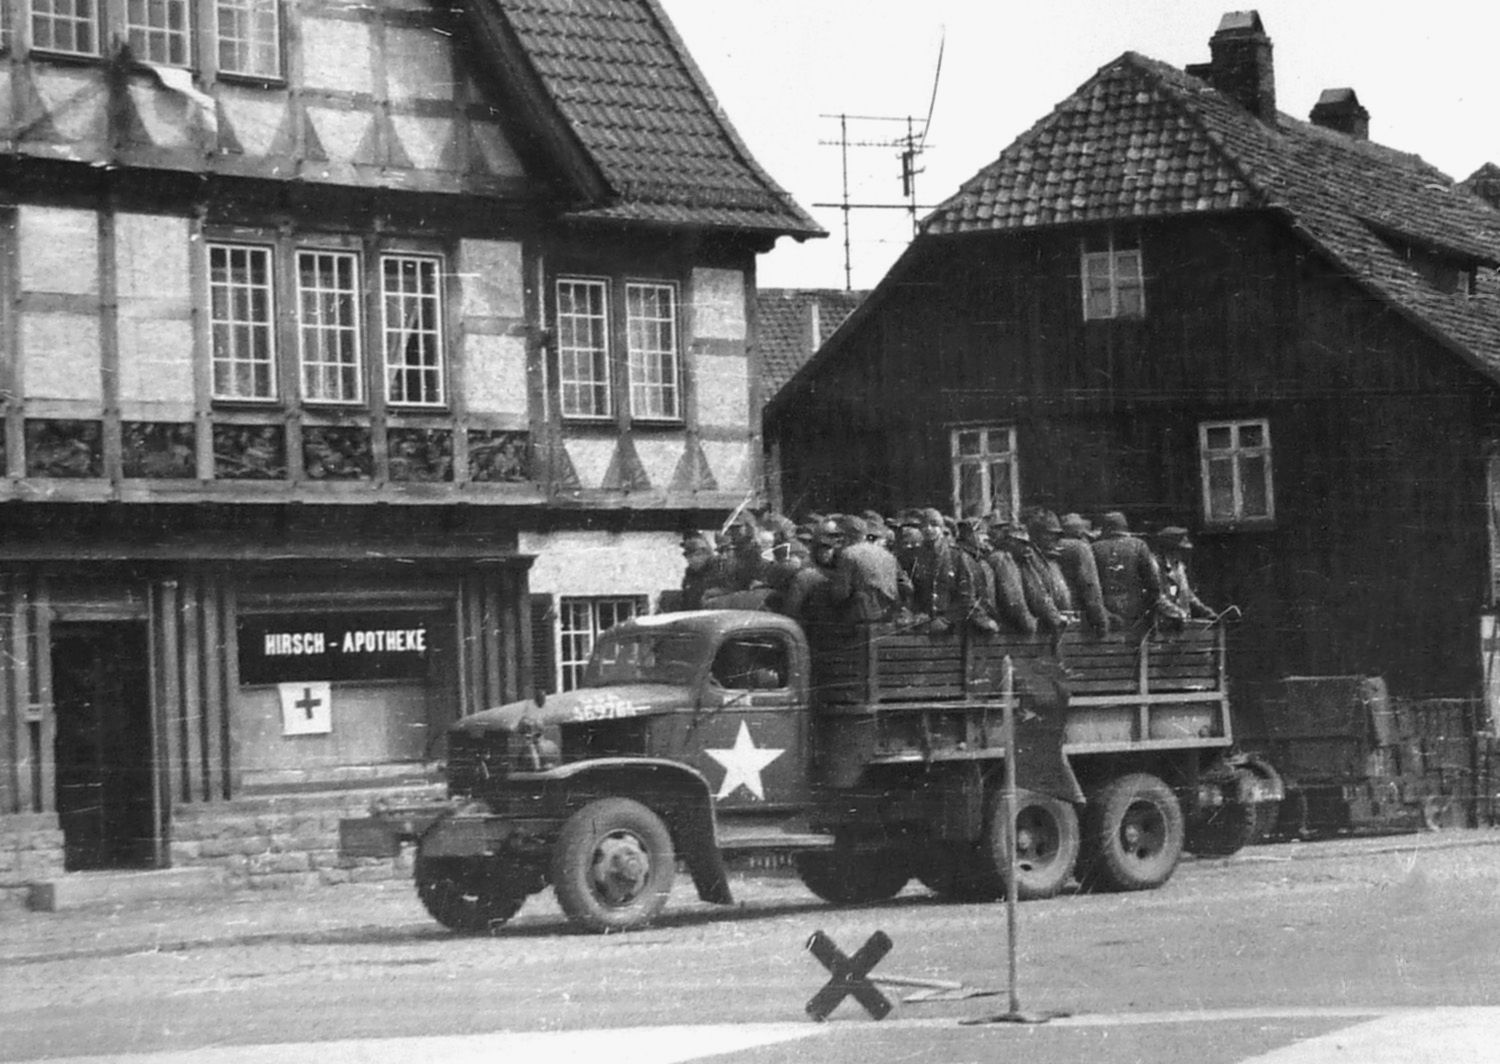 German prisoners of war riding in a 2.5-ton 6x6 truck are being transported to a POW stockade. Photo taken in Wolfenbuüttel, Germany, April 17, 1945.